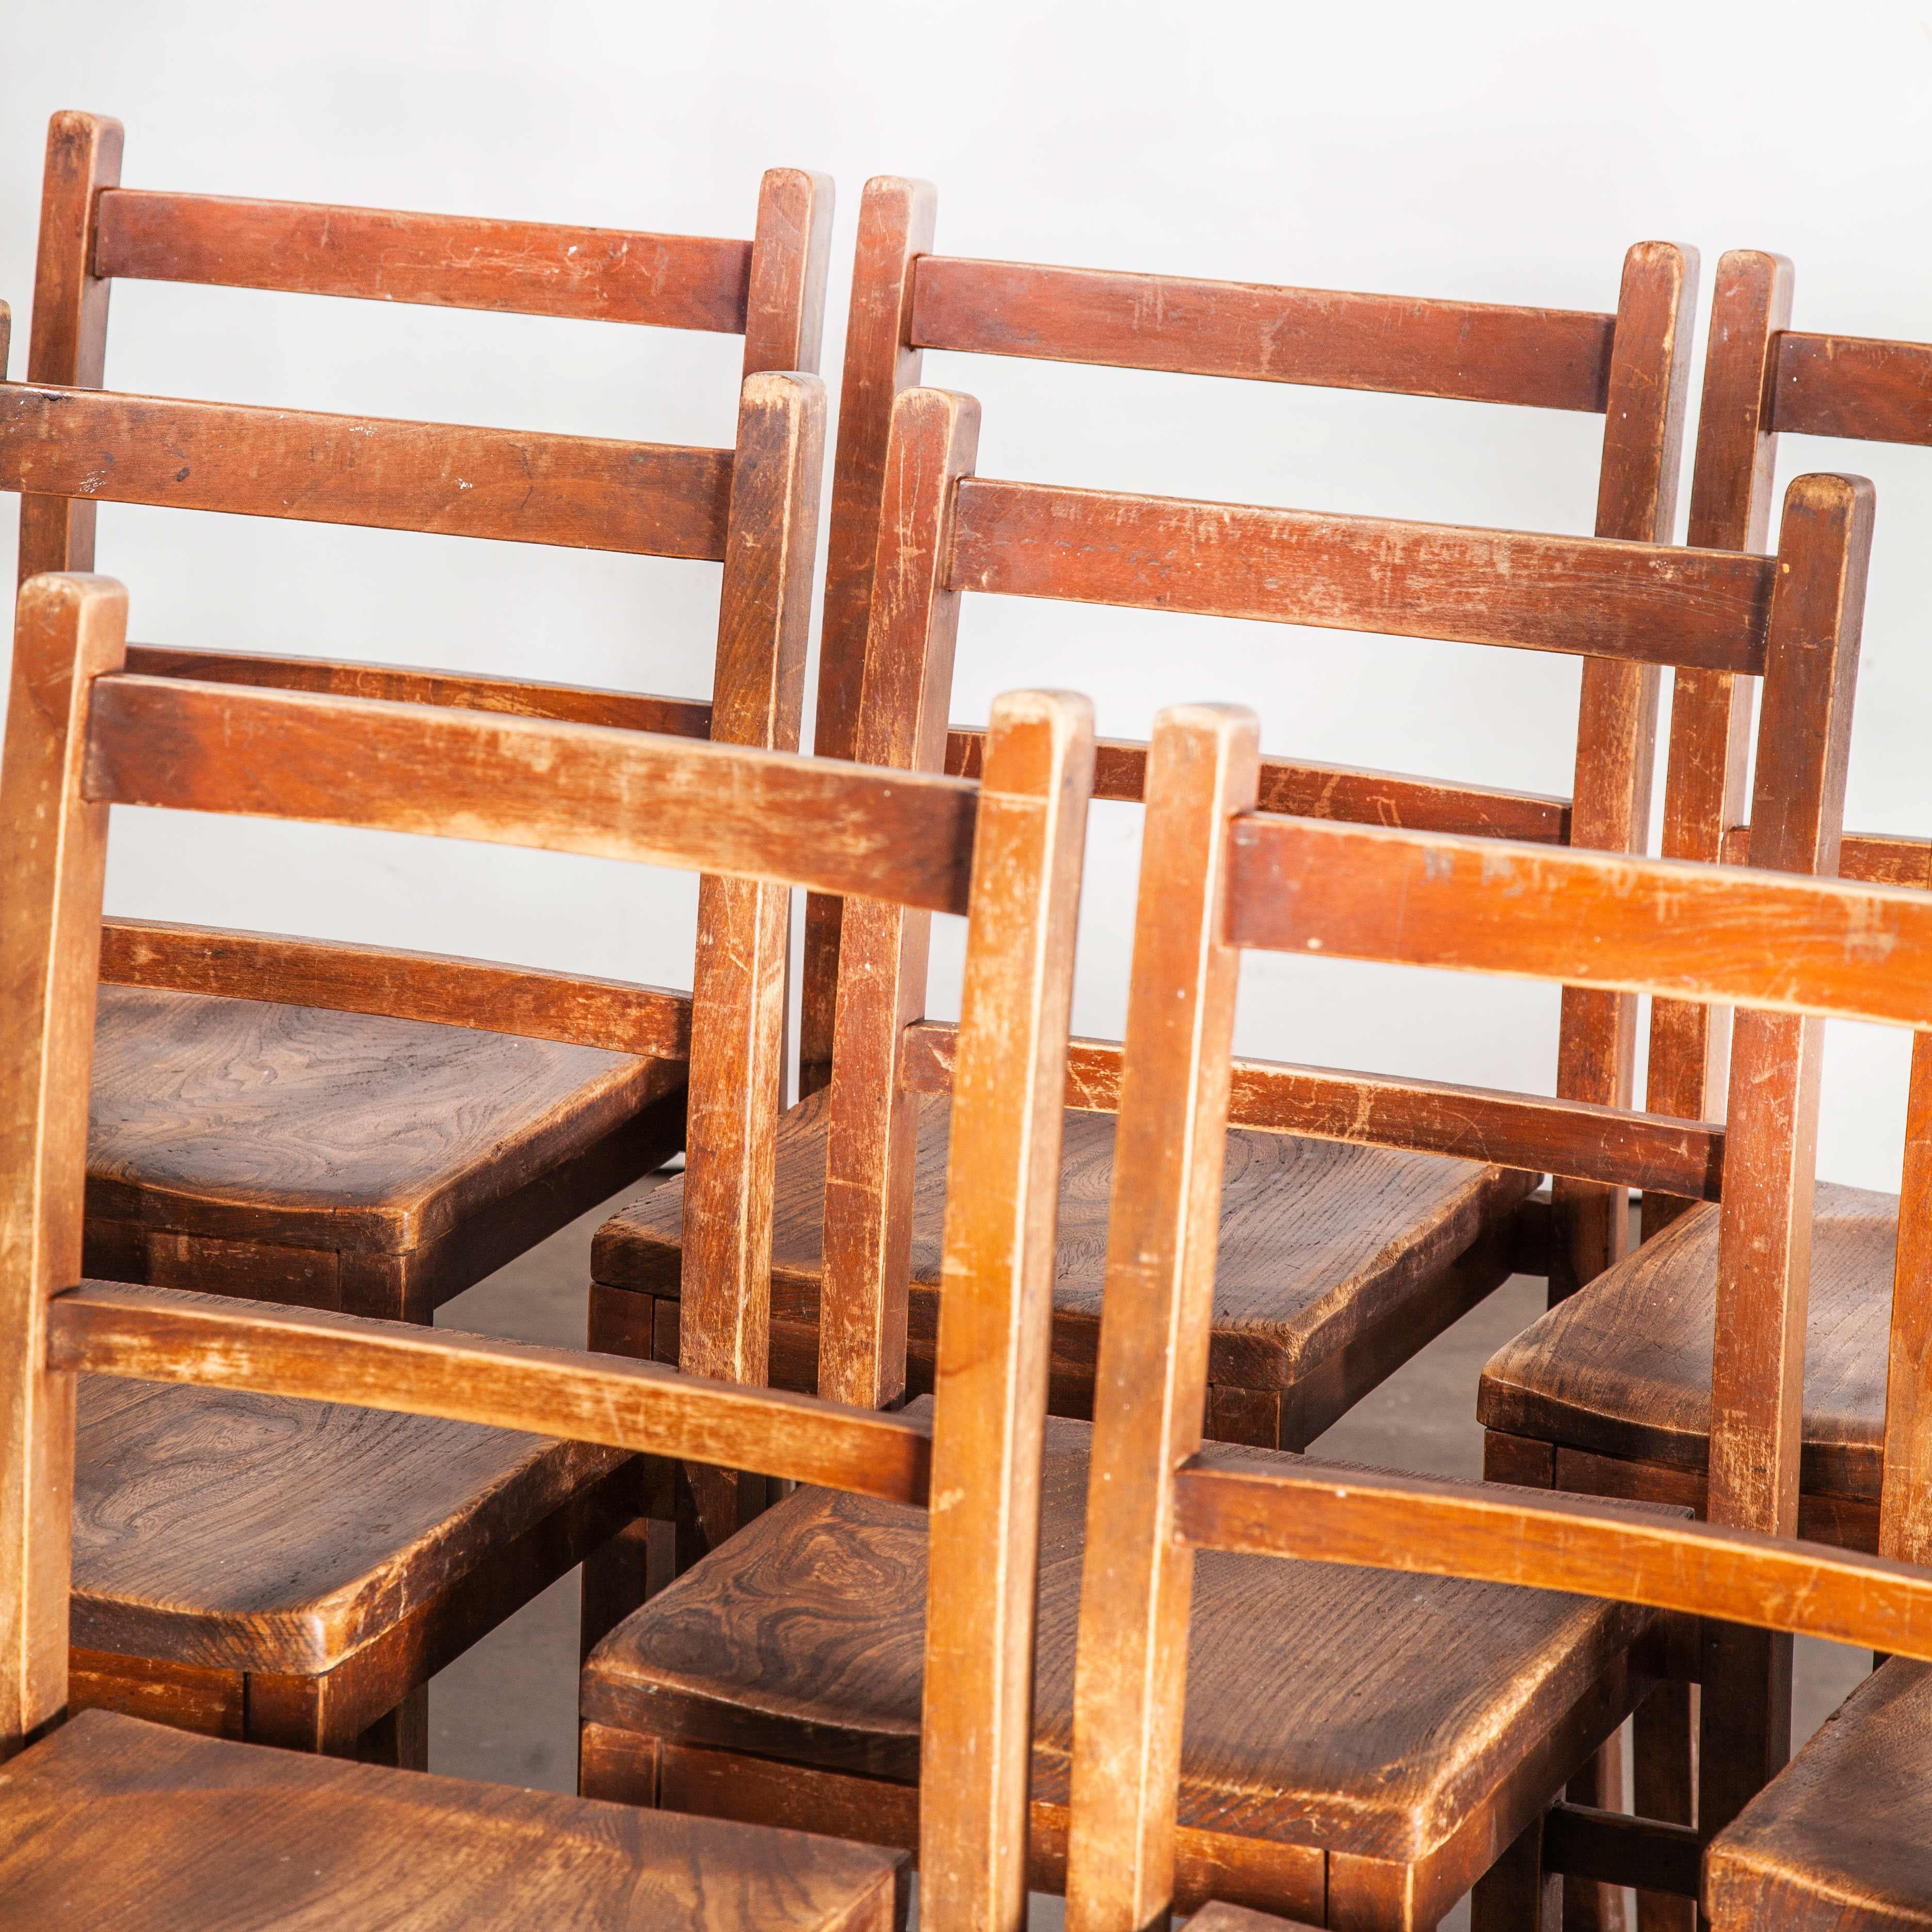 1920s elm chapel/church stacking dining chairs - good quantities available. It’s hard to date them precisely but we reckon these are church chairs from the 1920s. We have never seen them before and the clues to their age are the construction and